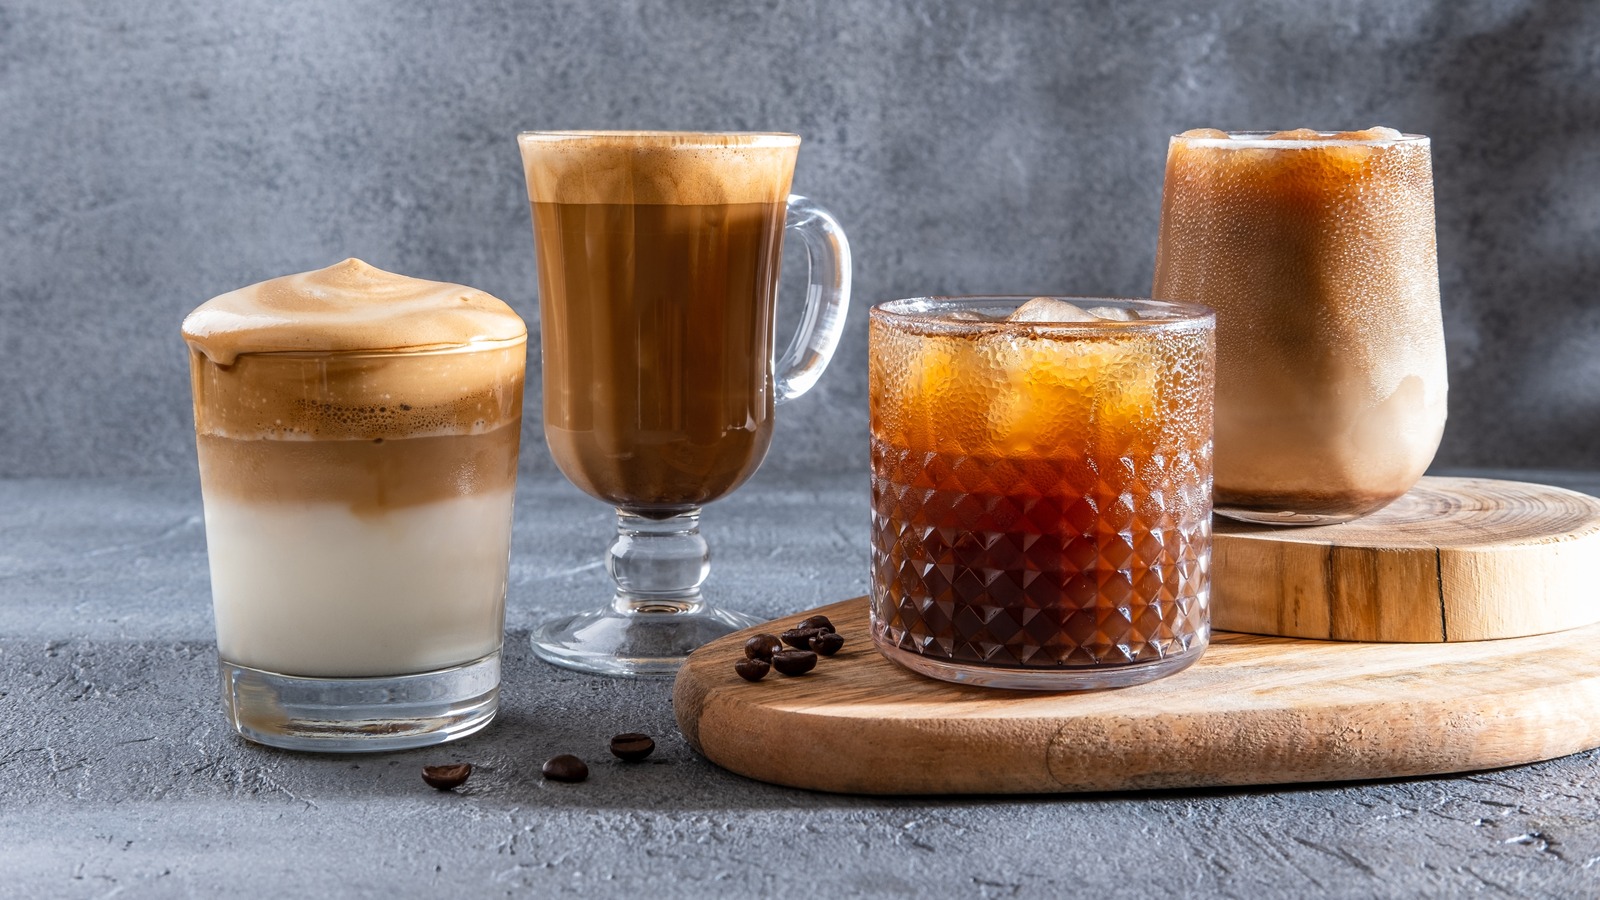 https://www.foodrepublic.com/img/gallery/get-to-know-your-cold-coffee-types-iced-cold-brew-and-nitro/l-intro-1688253699.jpg